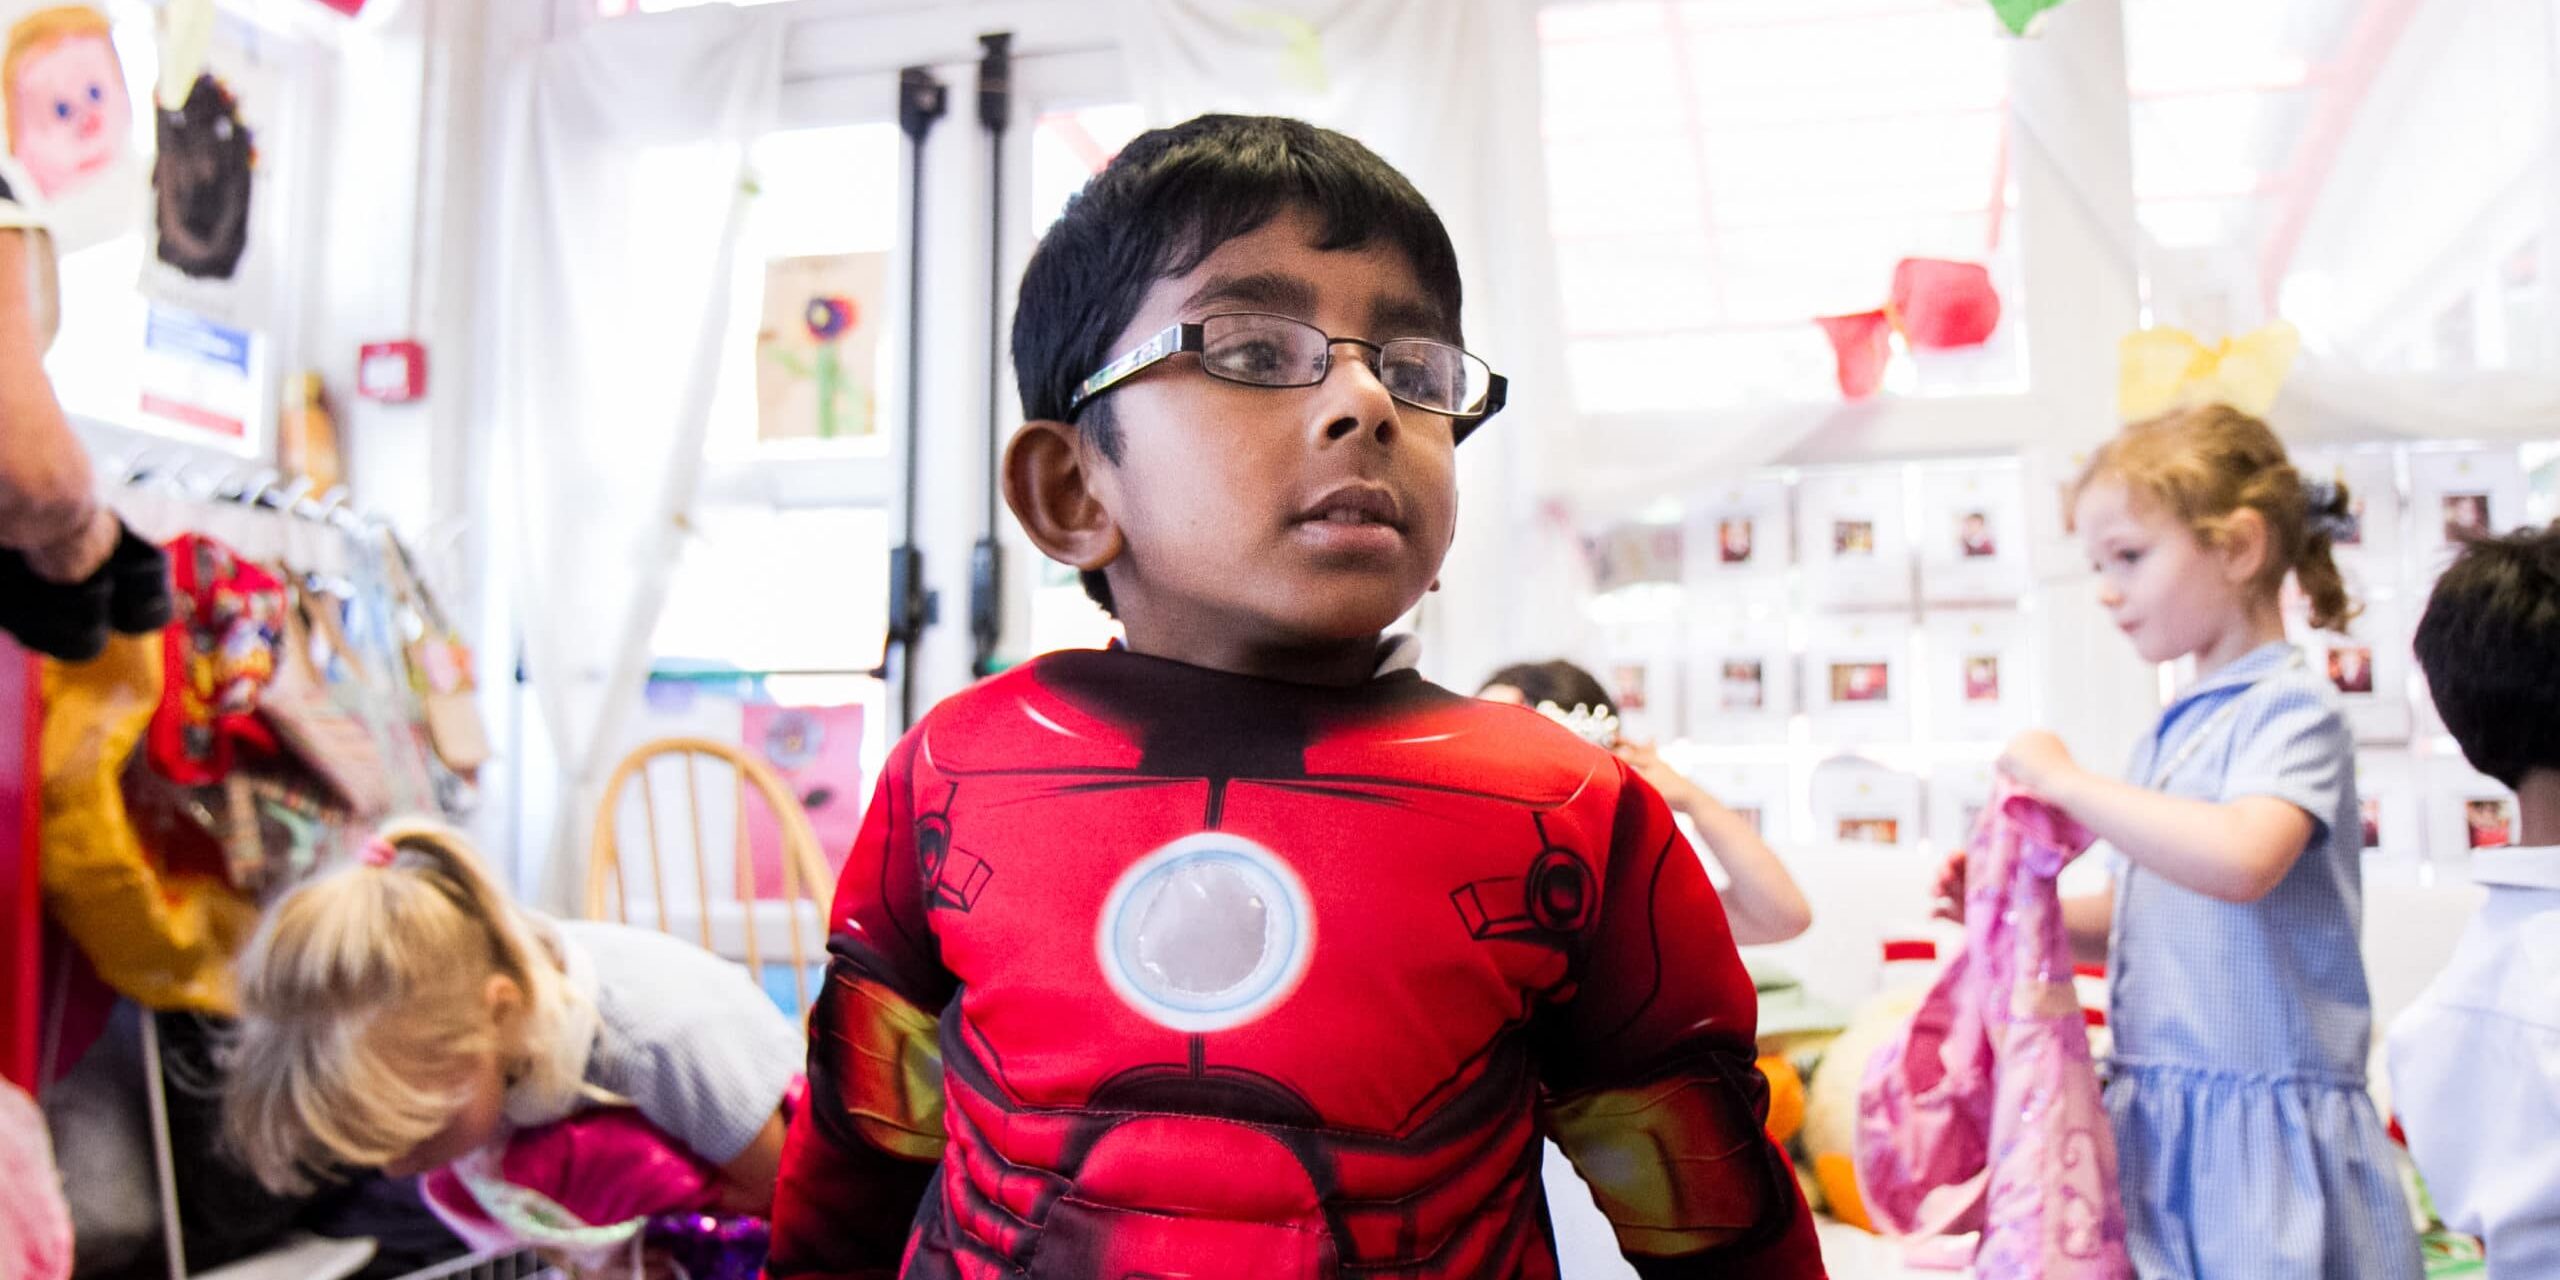 A boy dressed as a superhero in a nurture group at school